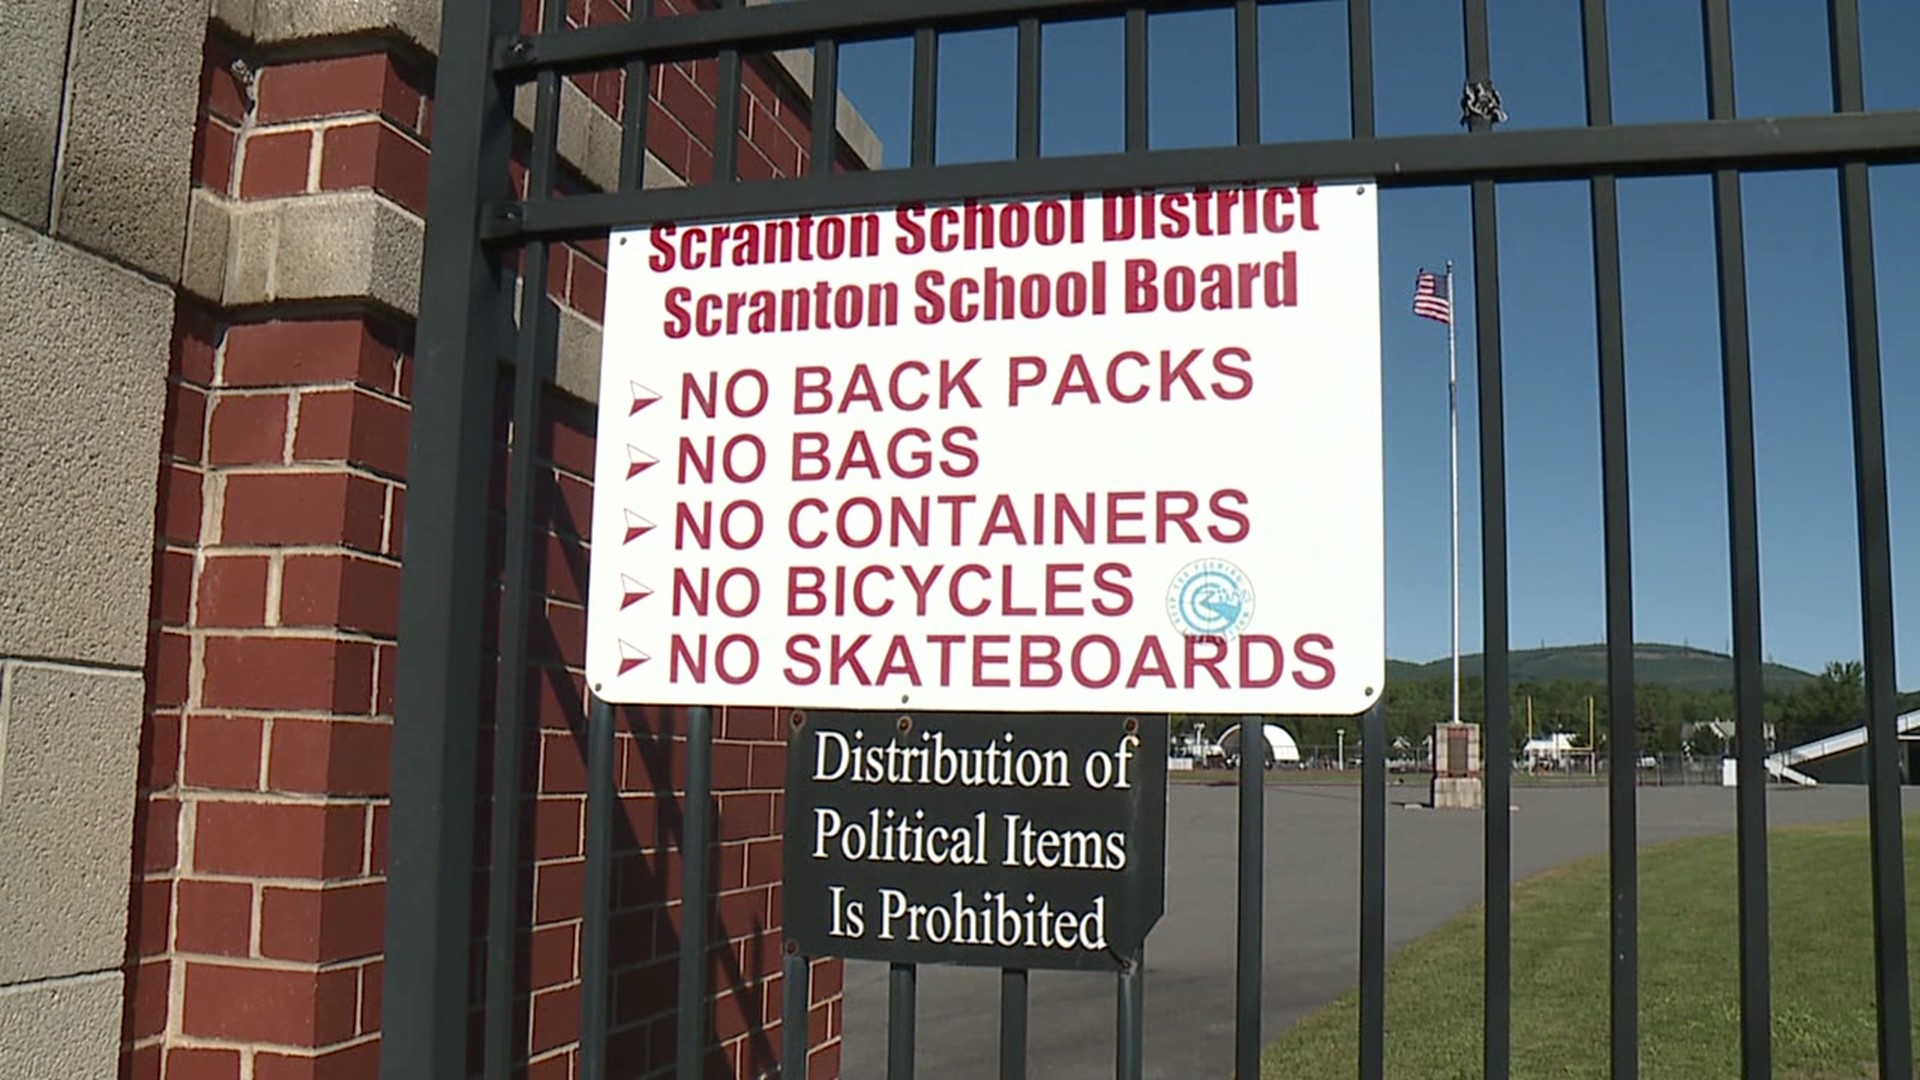 This follows the school district's earlier changes requiring students to have clear bookbags.